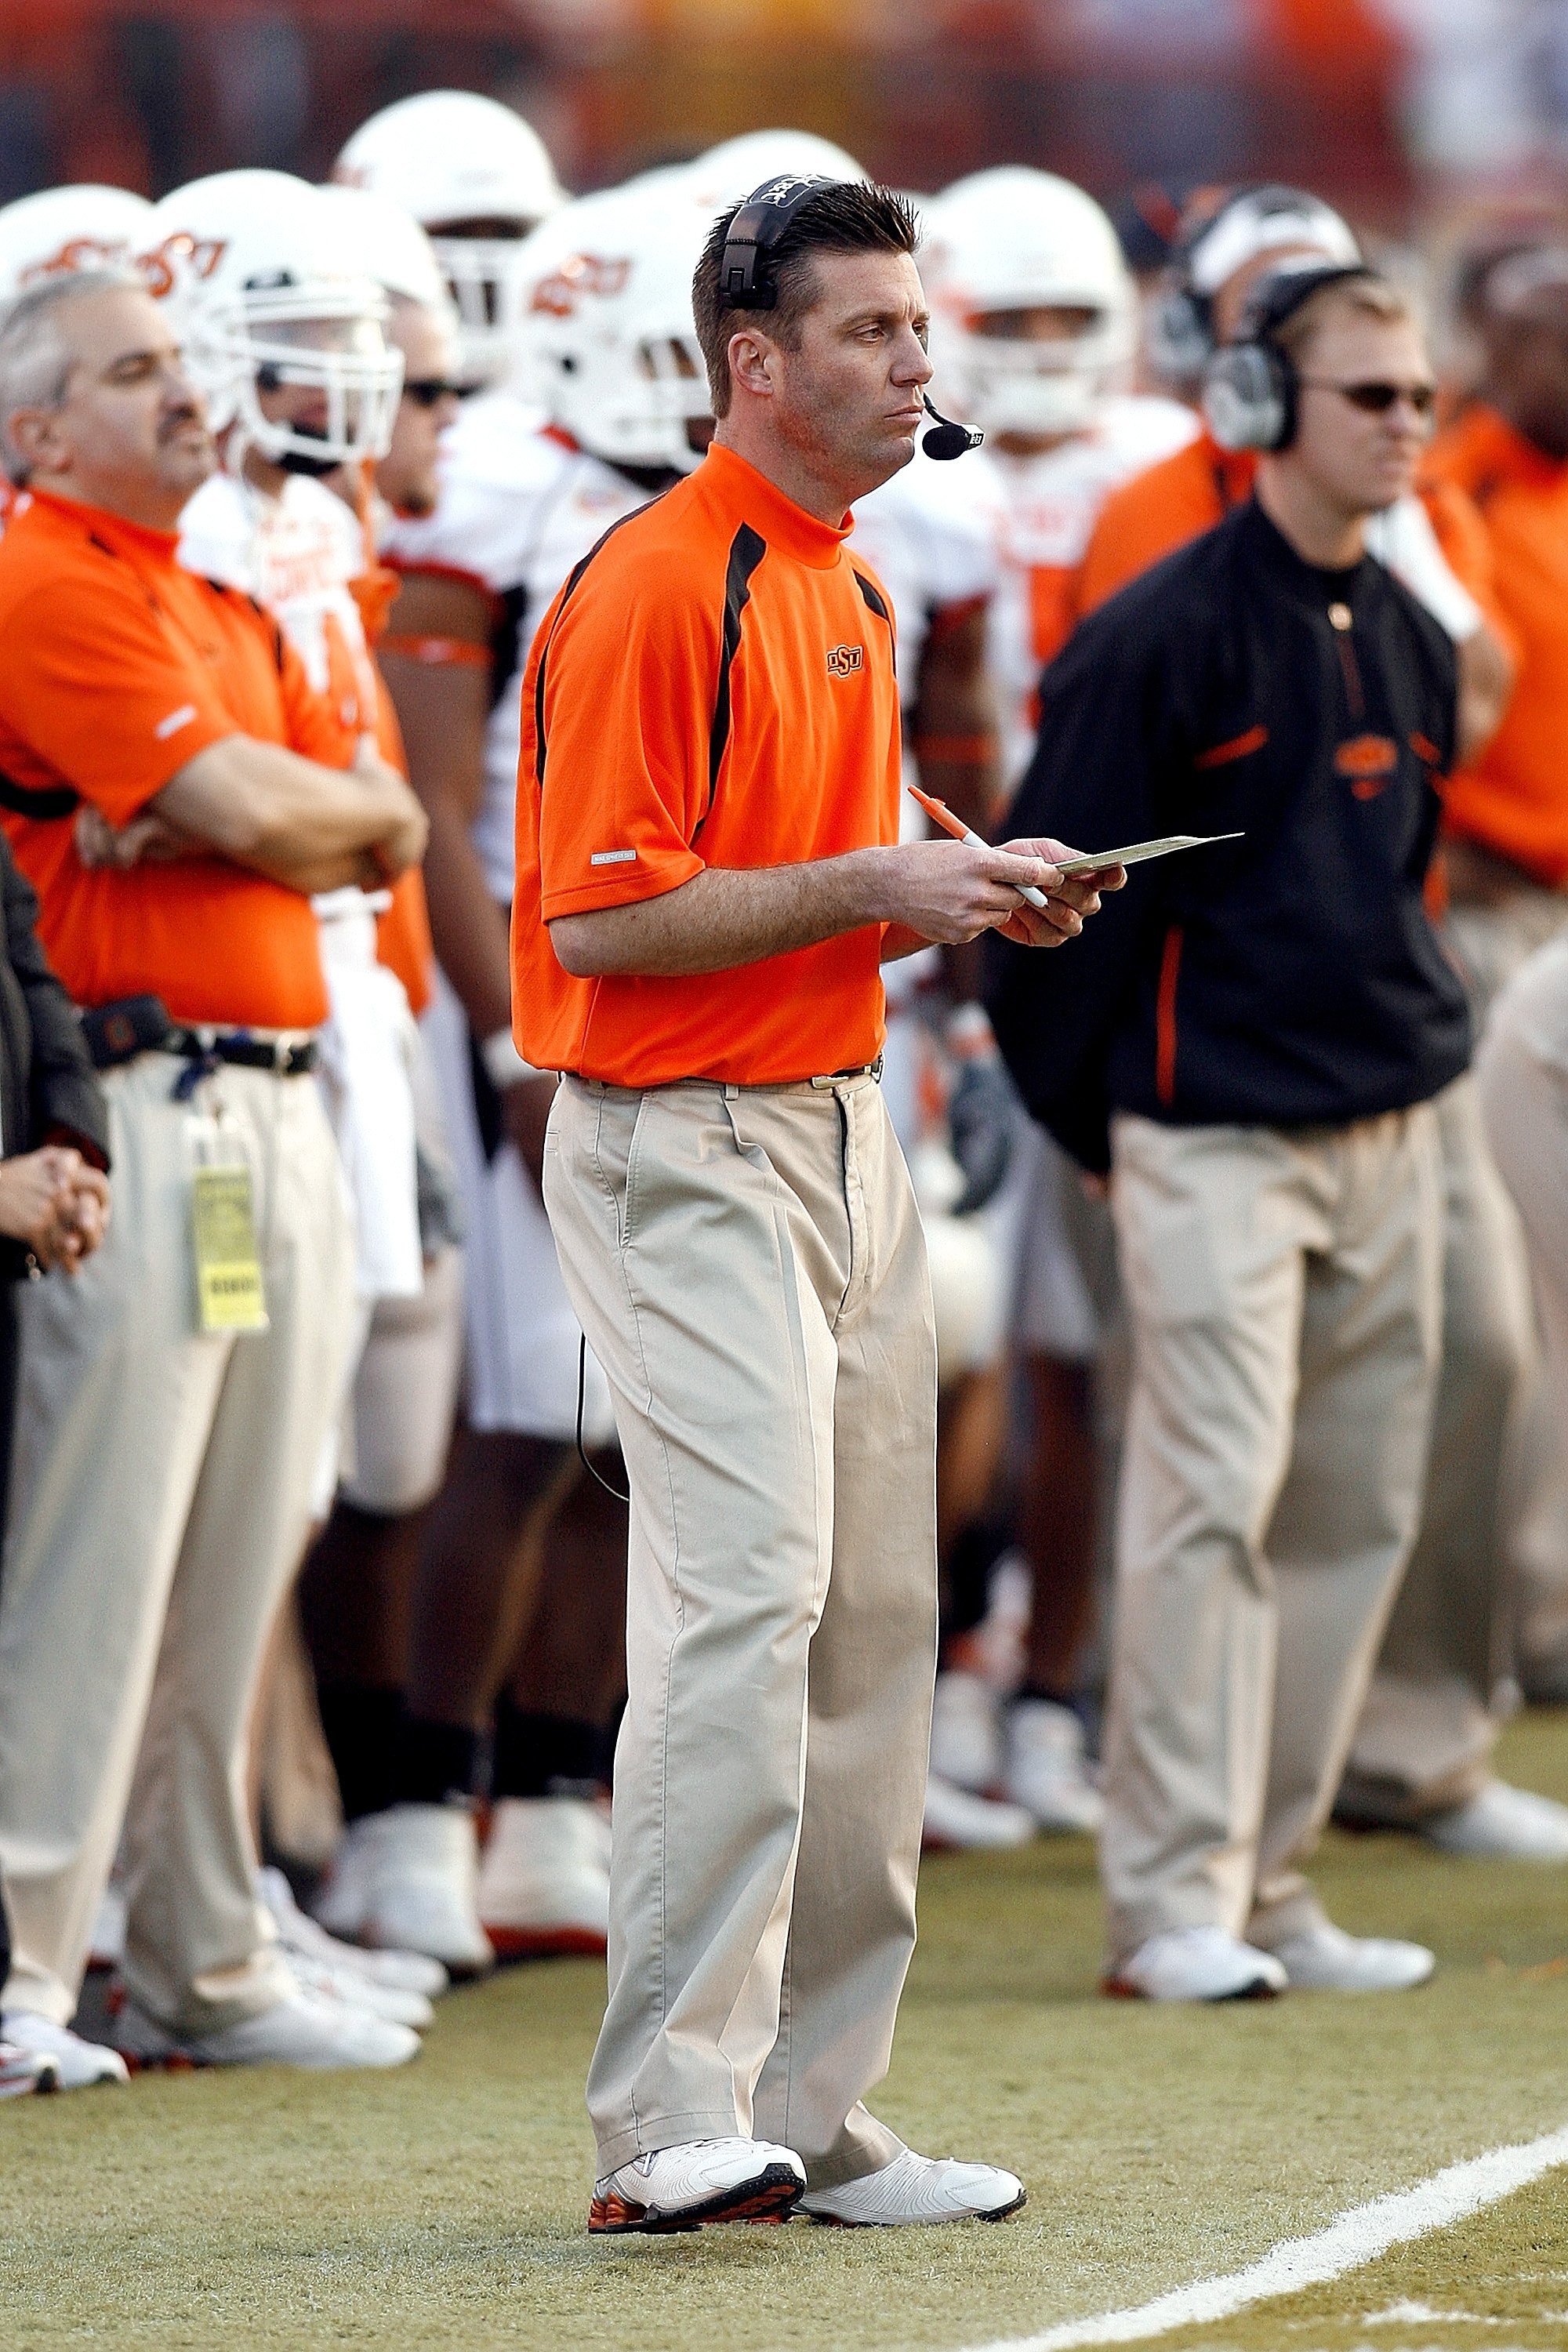 SHREVEPORT, LA - DECEMBER 28:  Head coach Mike Gundy of Oklahoma State watches a play against  Alabama on December 28, 2006 during the PetroSun Independence Bowl at Independence Stadium in Shreveport, Louisiana. (Photo by Chris Graythen/Getty Images)